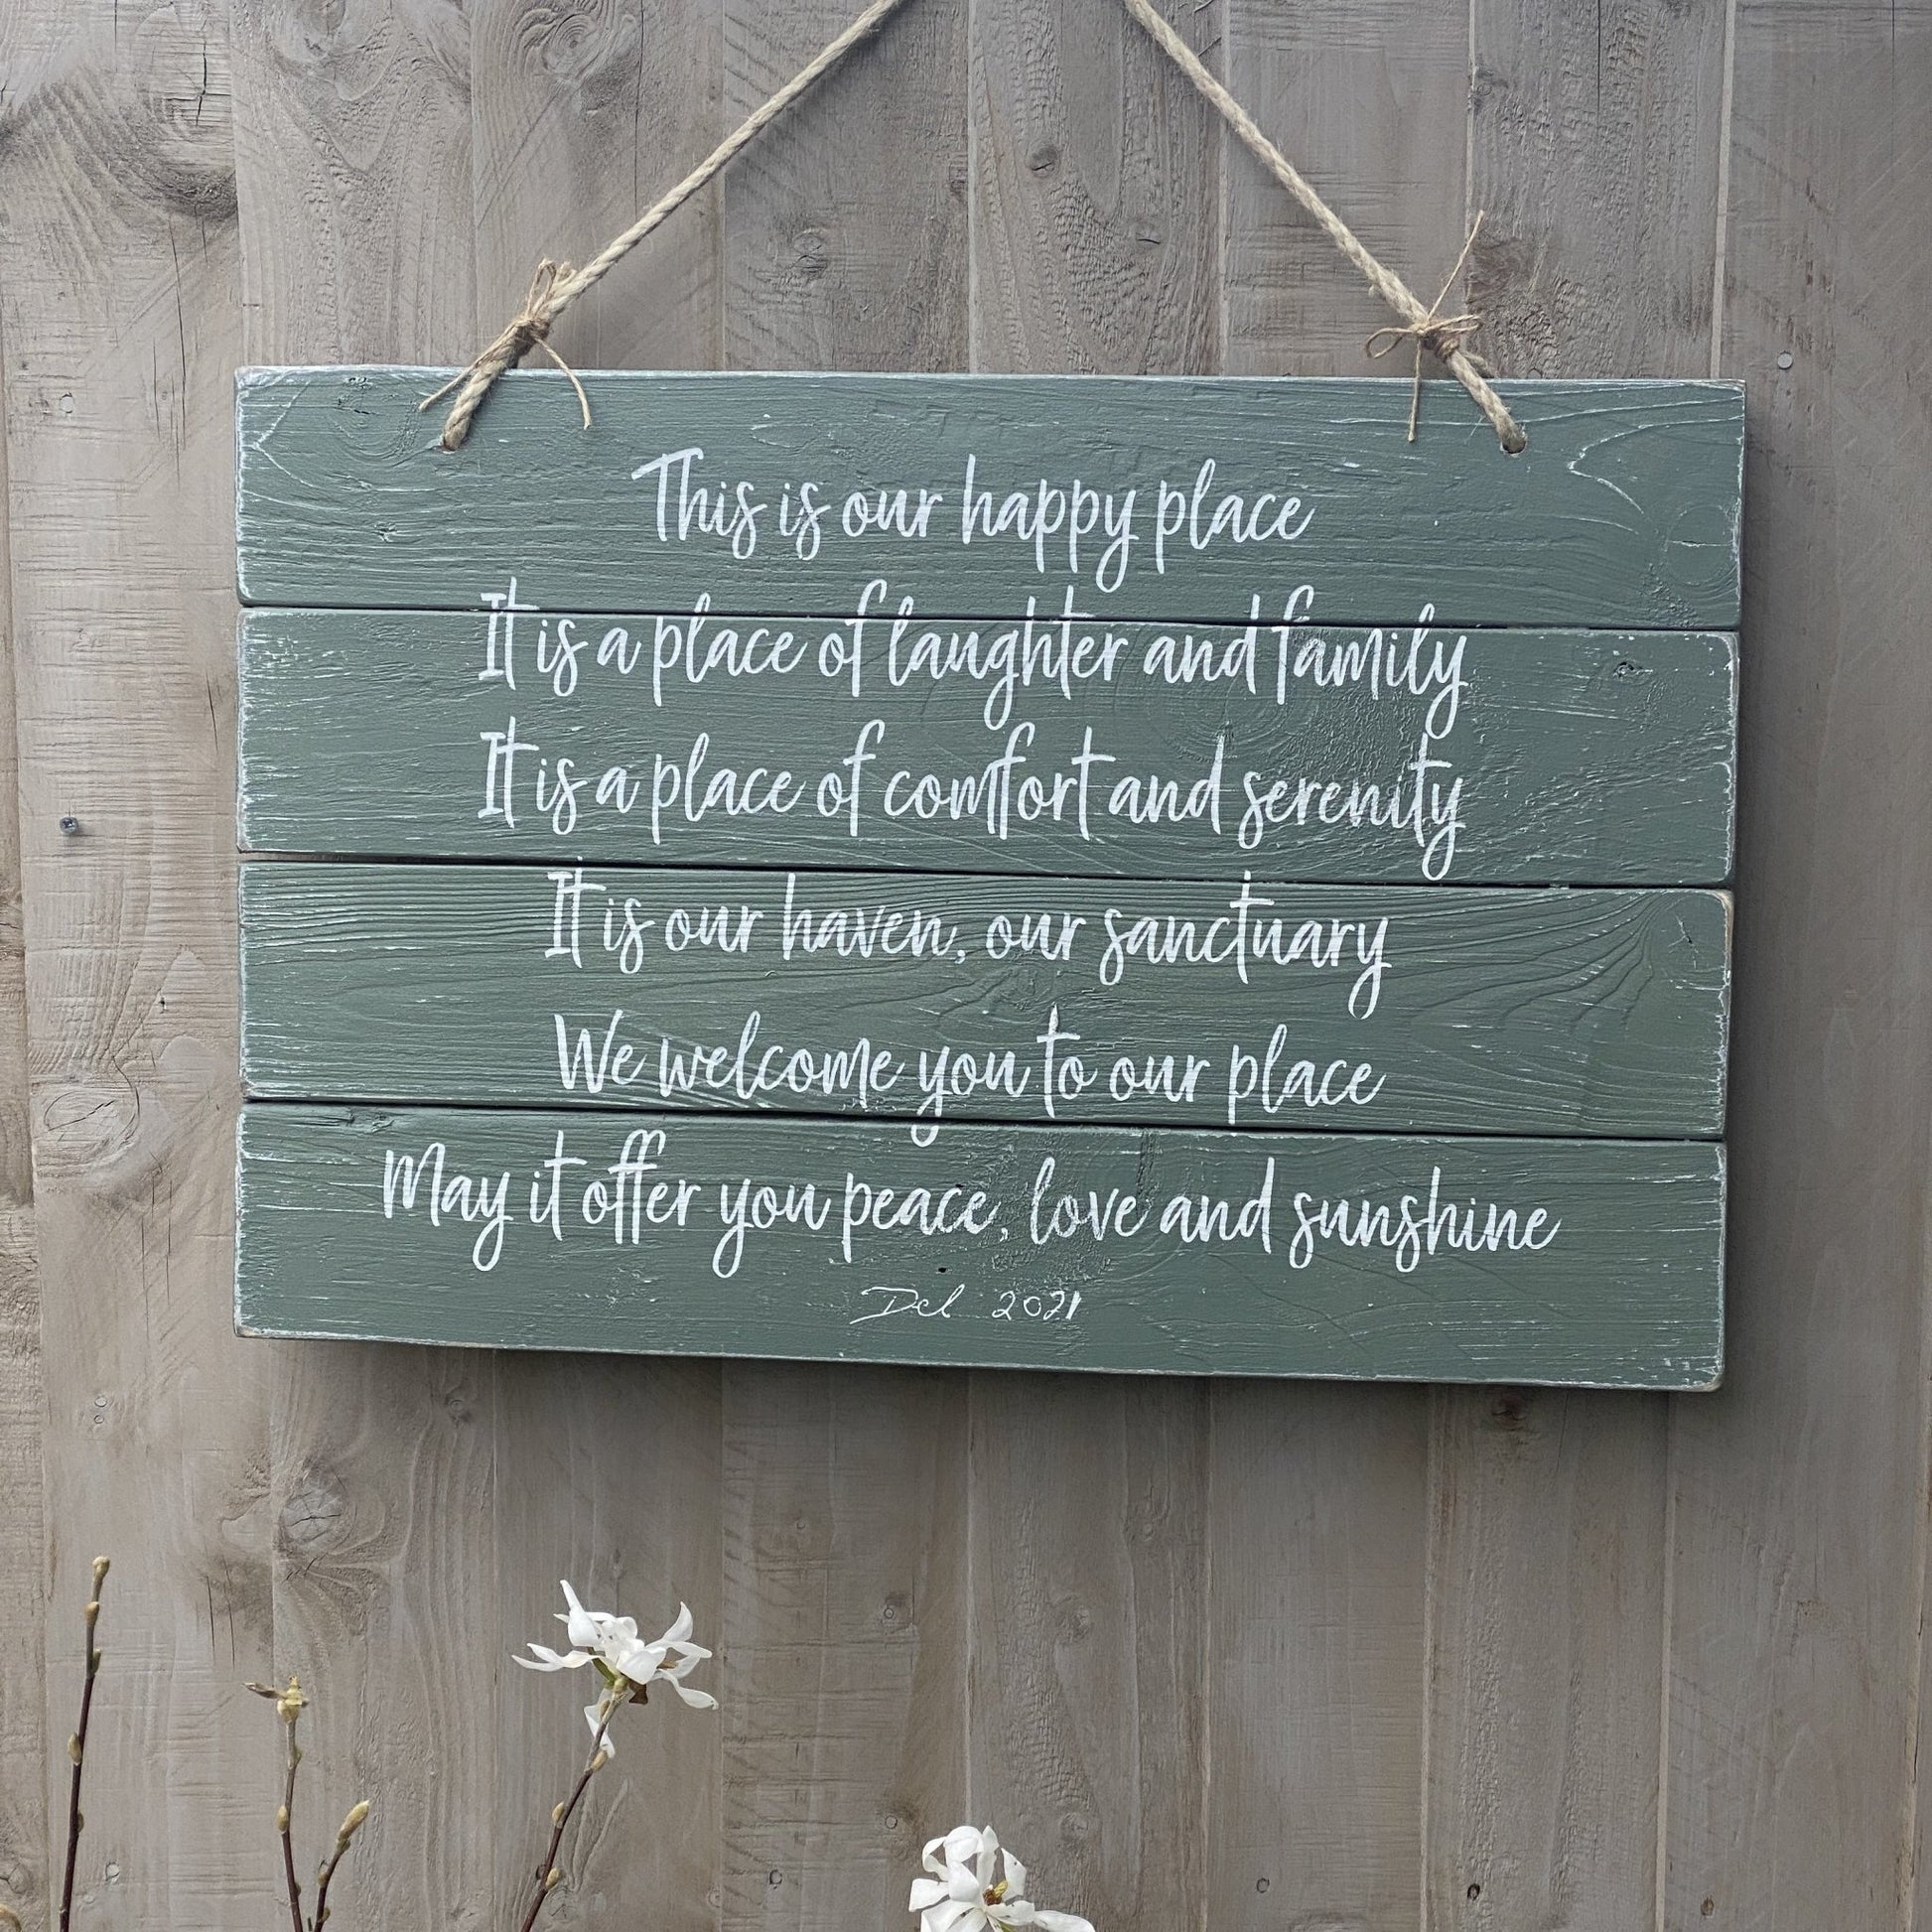 Create Your Own Planked Wood Sign | Bespoke - The Imperfect Wood Company - Create Your Own Planked Sign